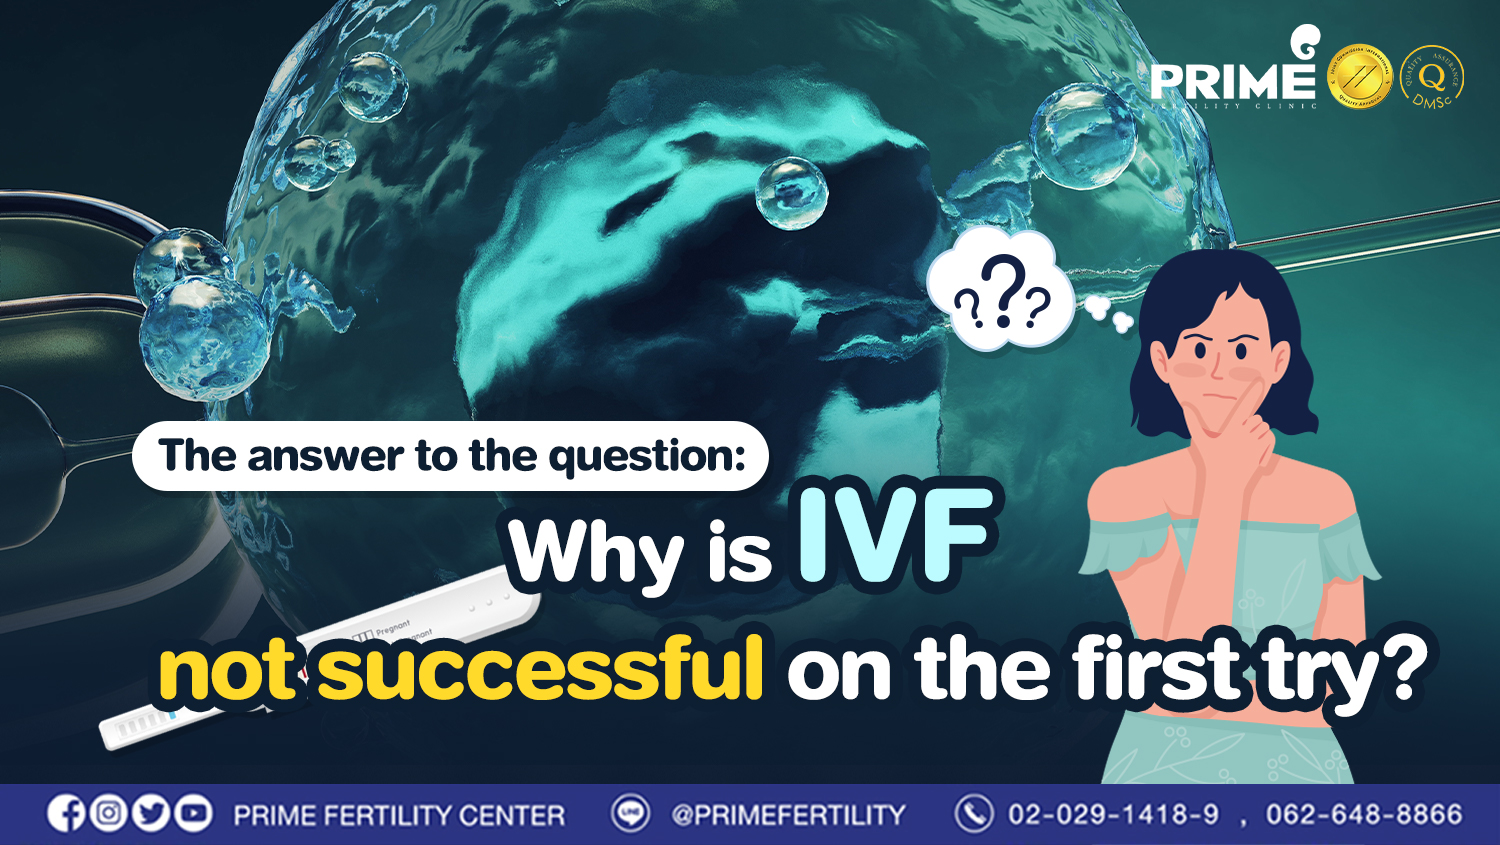 The answer to the question: why is IVF not successful on the first try?